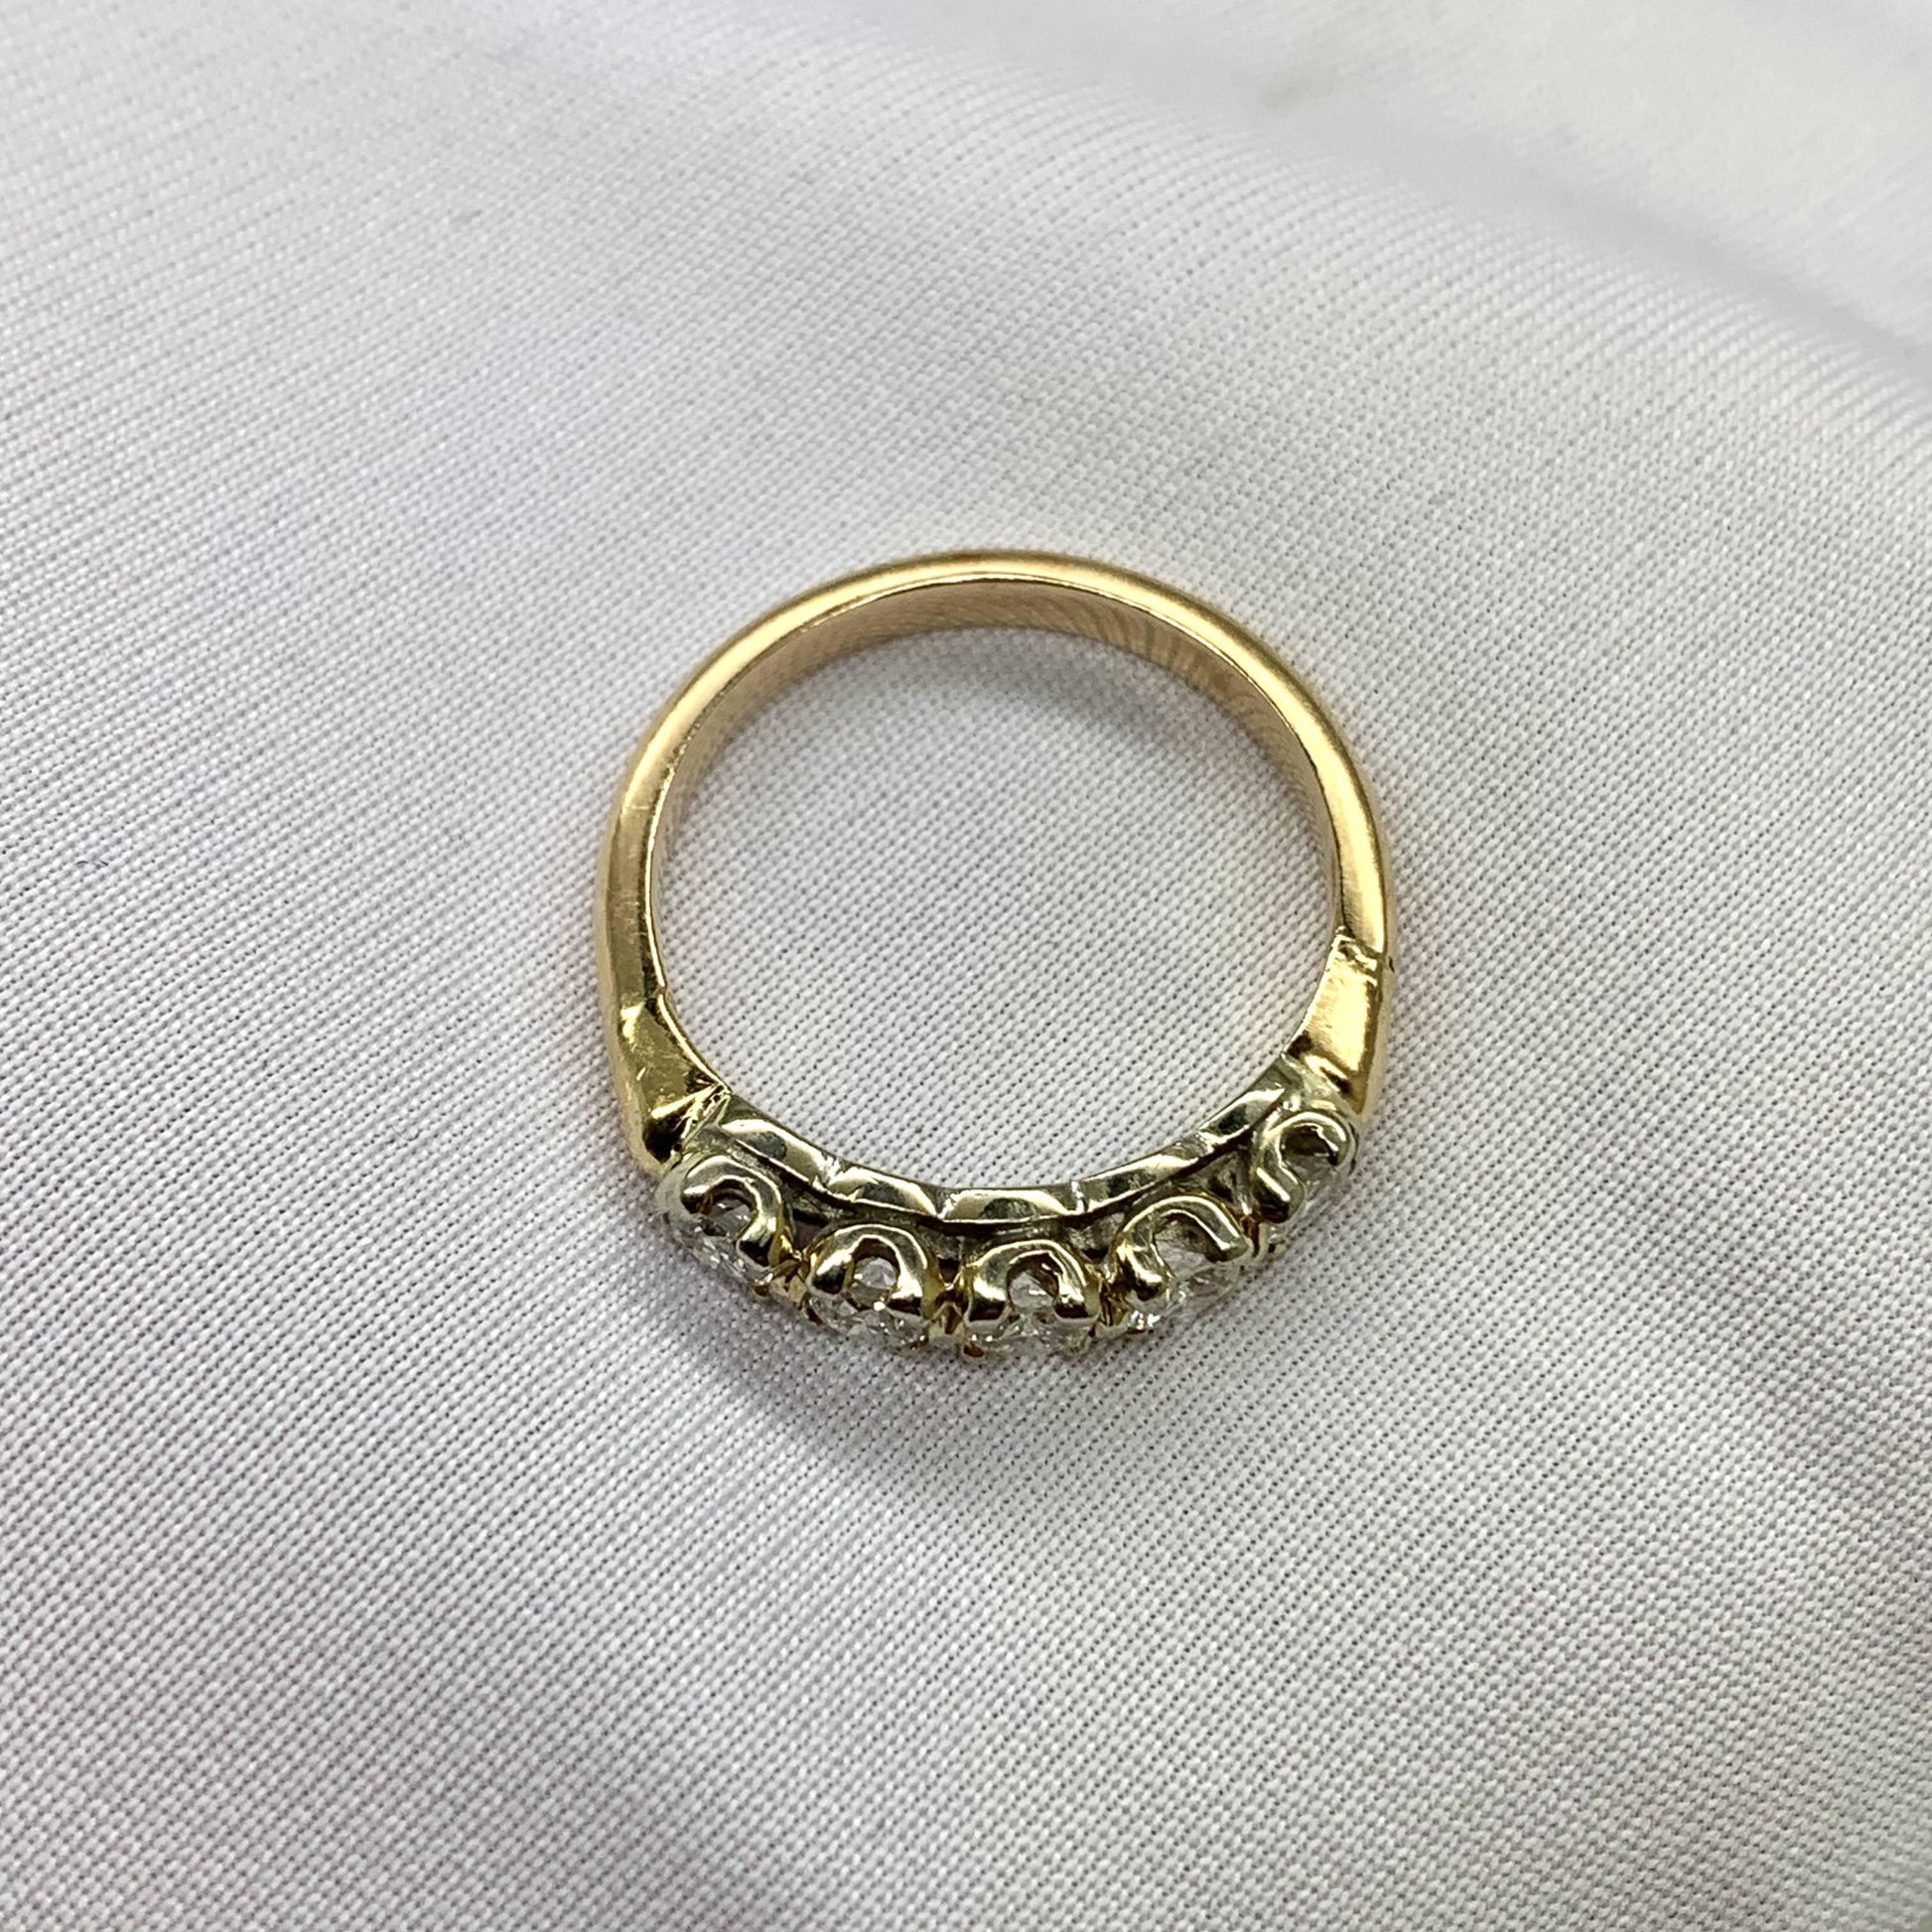 0.55 cttw. White Diamond Channel Set Ring in 14k Gold Two-Toned Ring